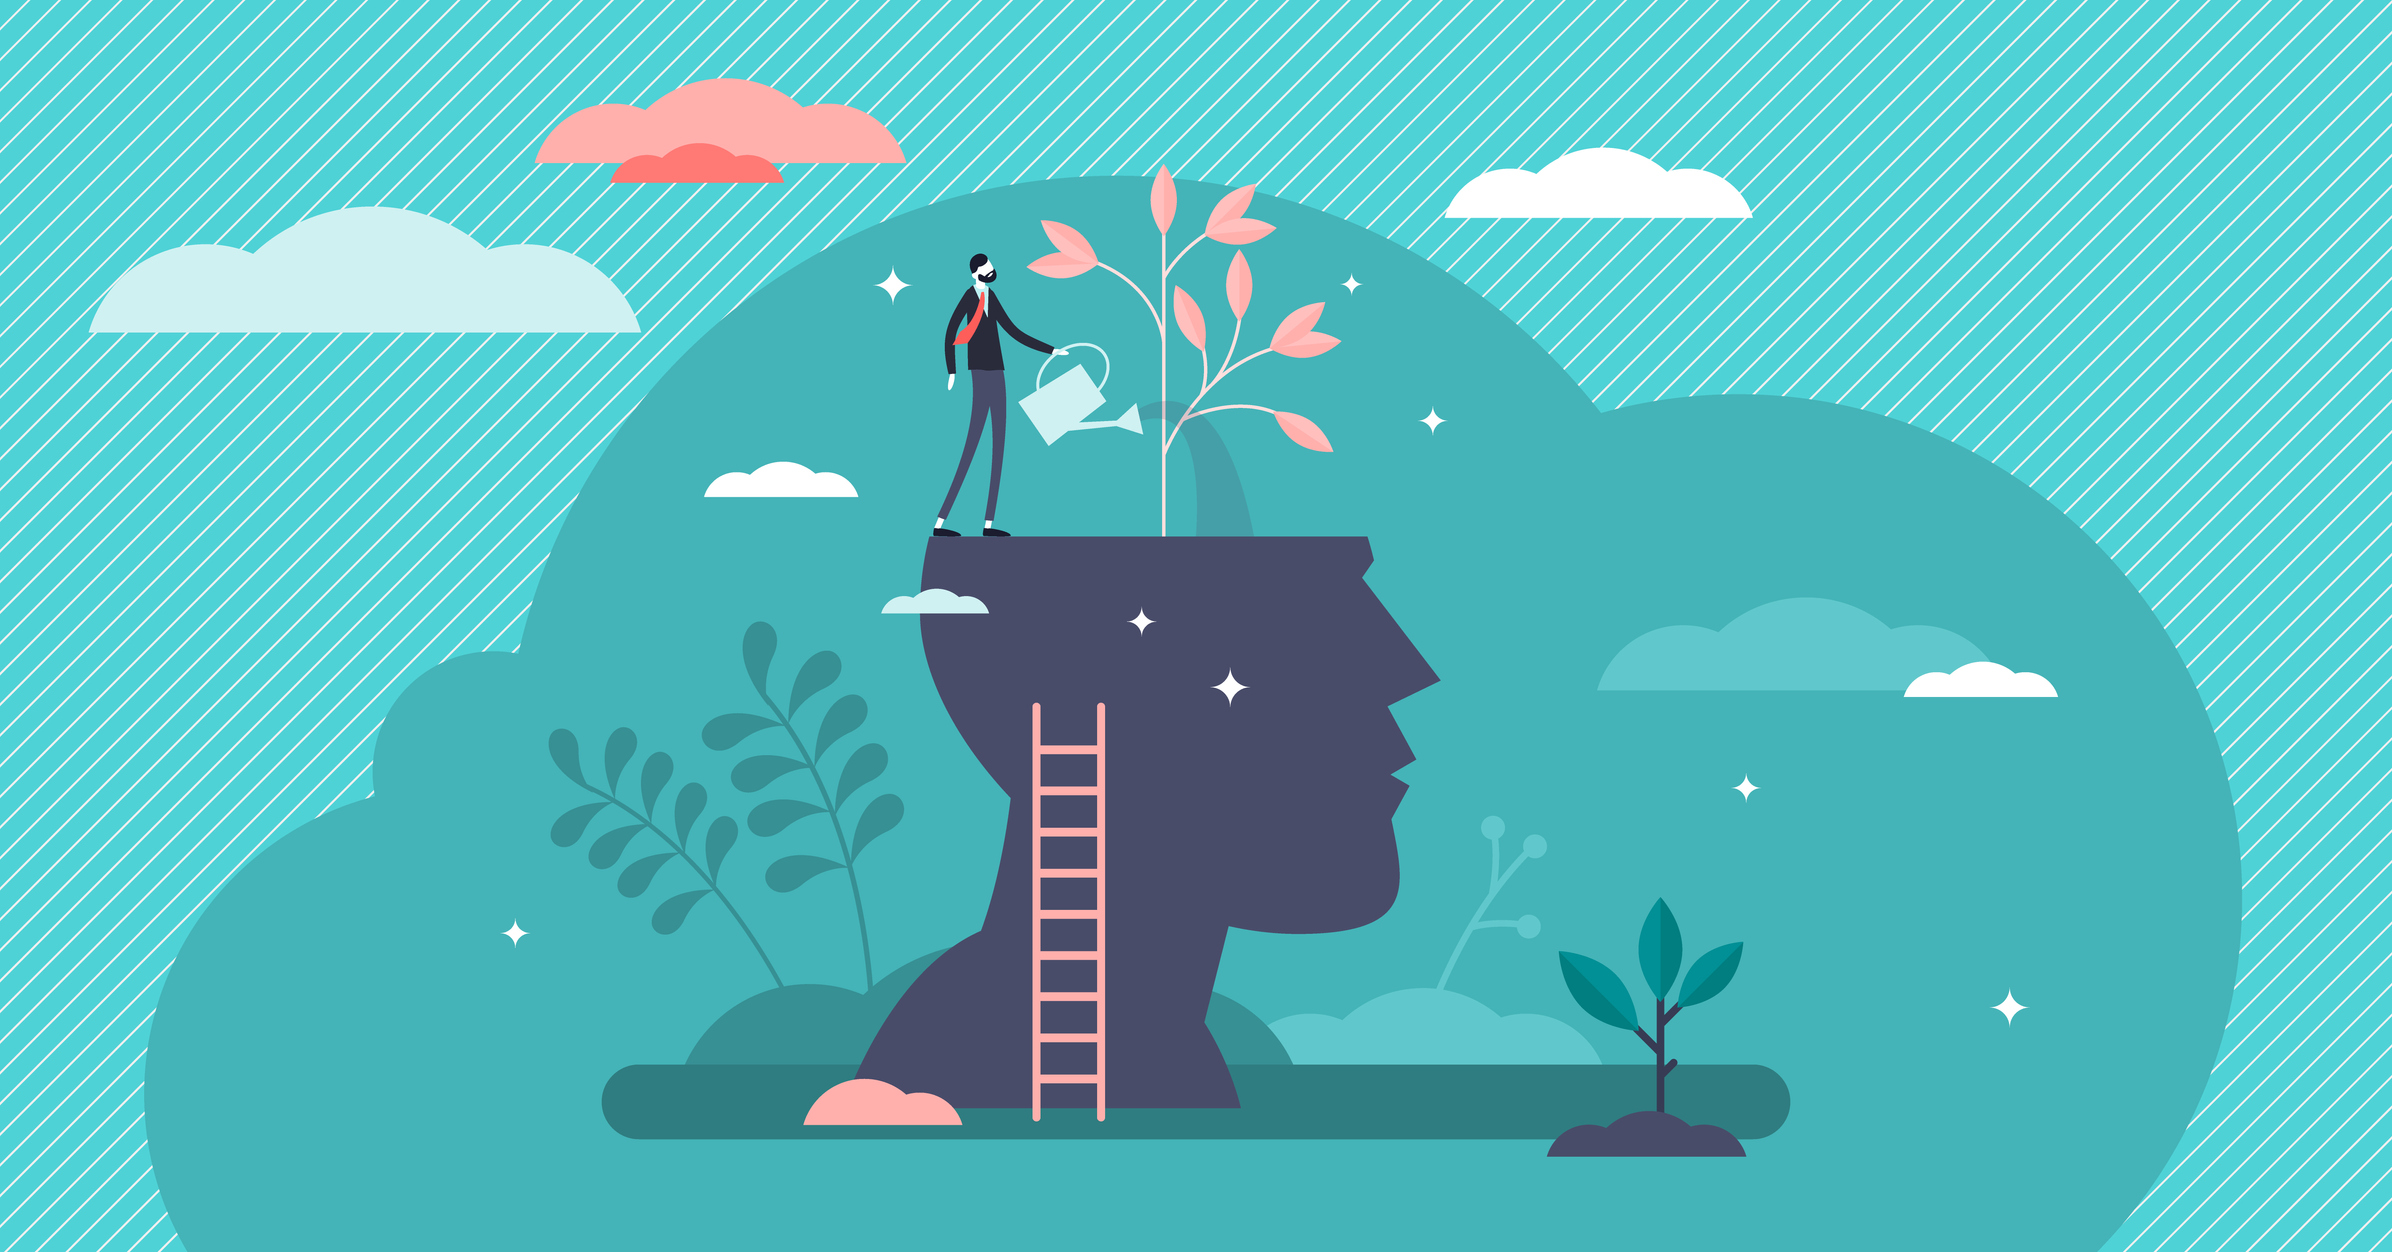 graphic of person tending to plants growing out of a person's head, suggesting a flourishing mind